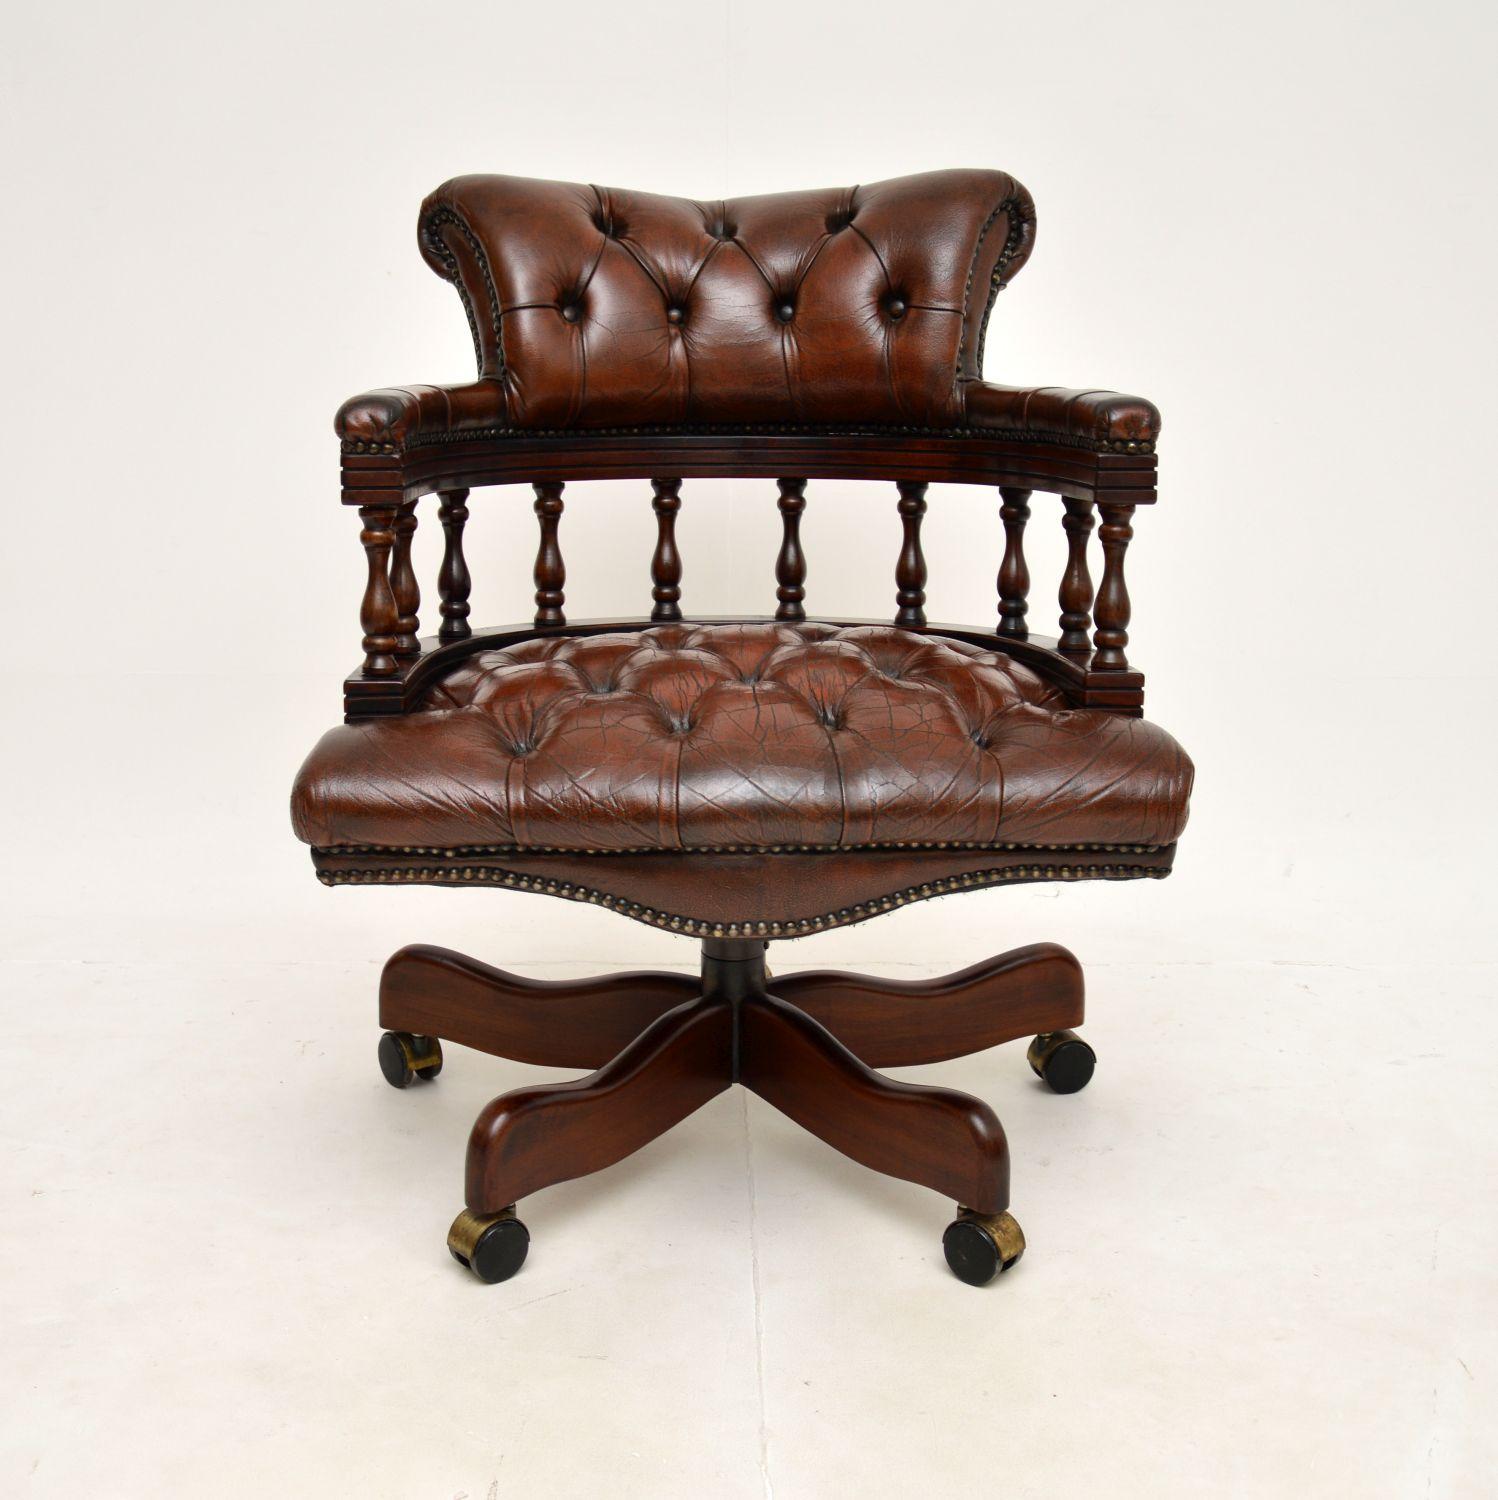 A smart and very comfortable antique Victorian style leather swivel desk chair. This was made in England, it dates from around the 1960’s.

The quality is superb, with beautiful deep buttoned leather upholstery and a very well designed solid wooden